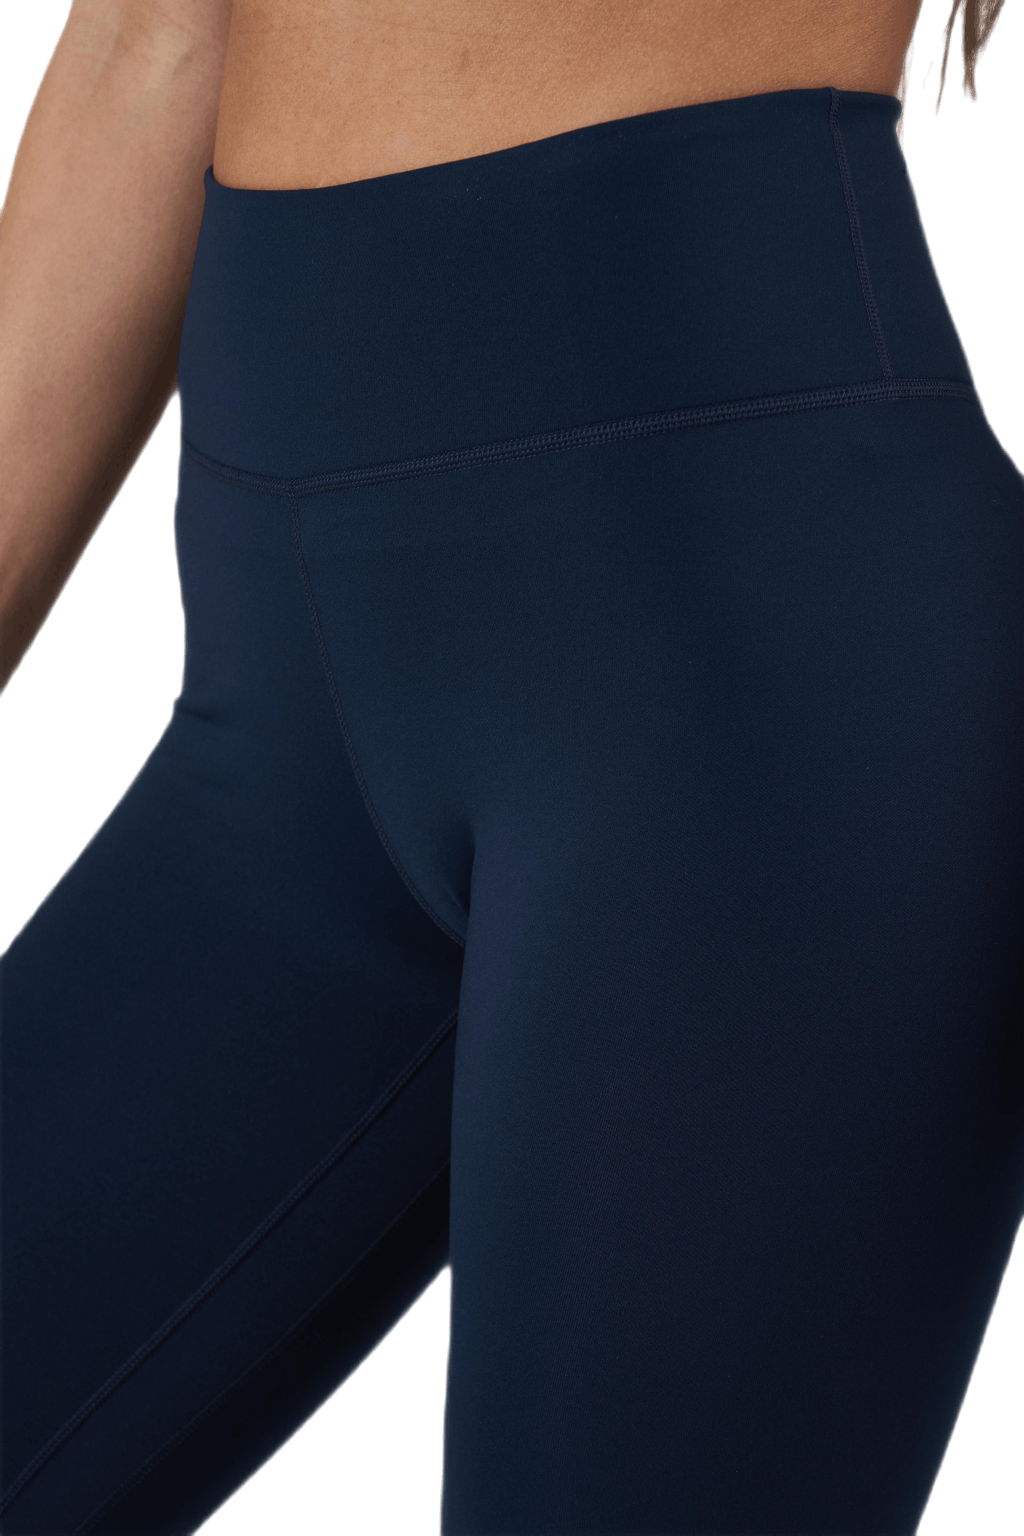 One Mid-Rise 7/8 Tight Blue